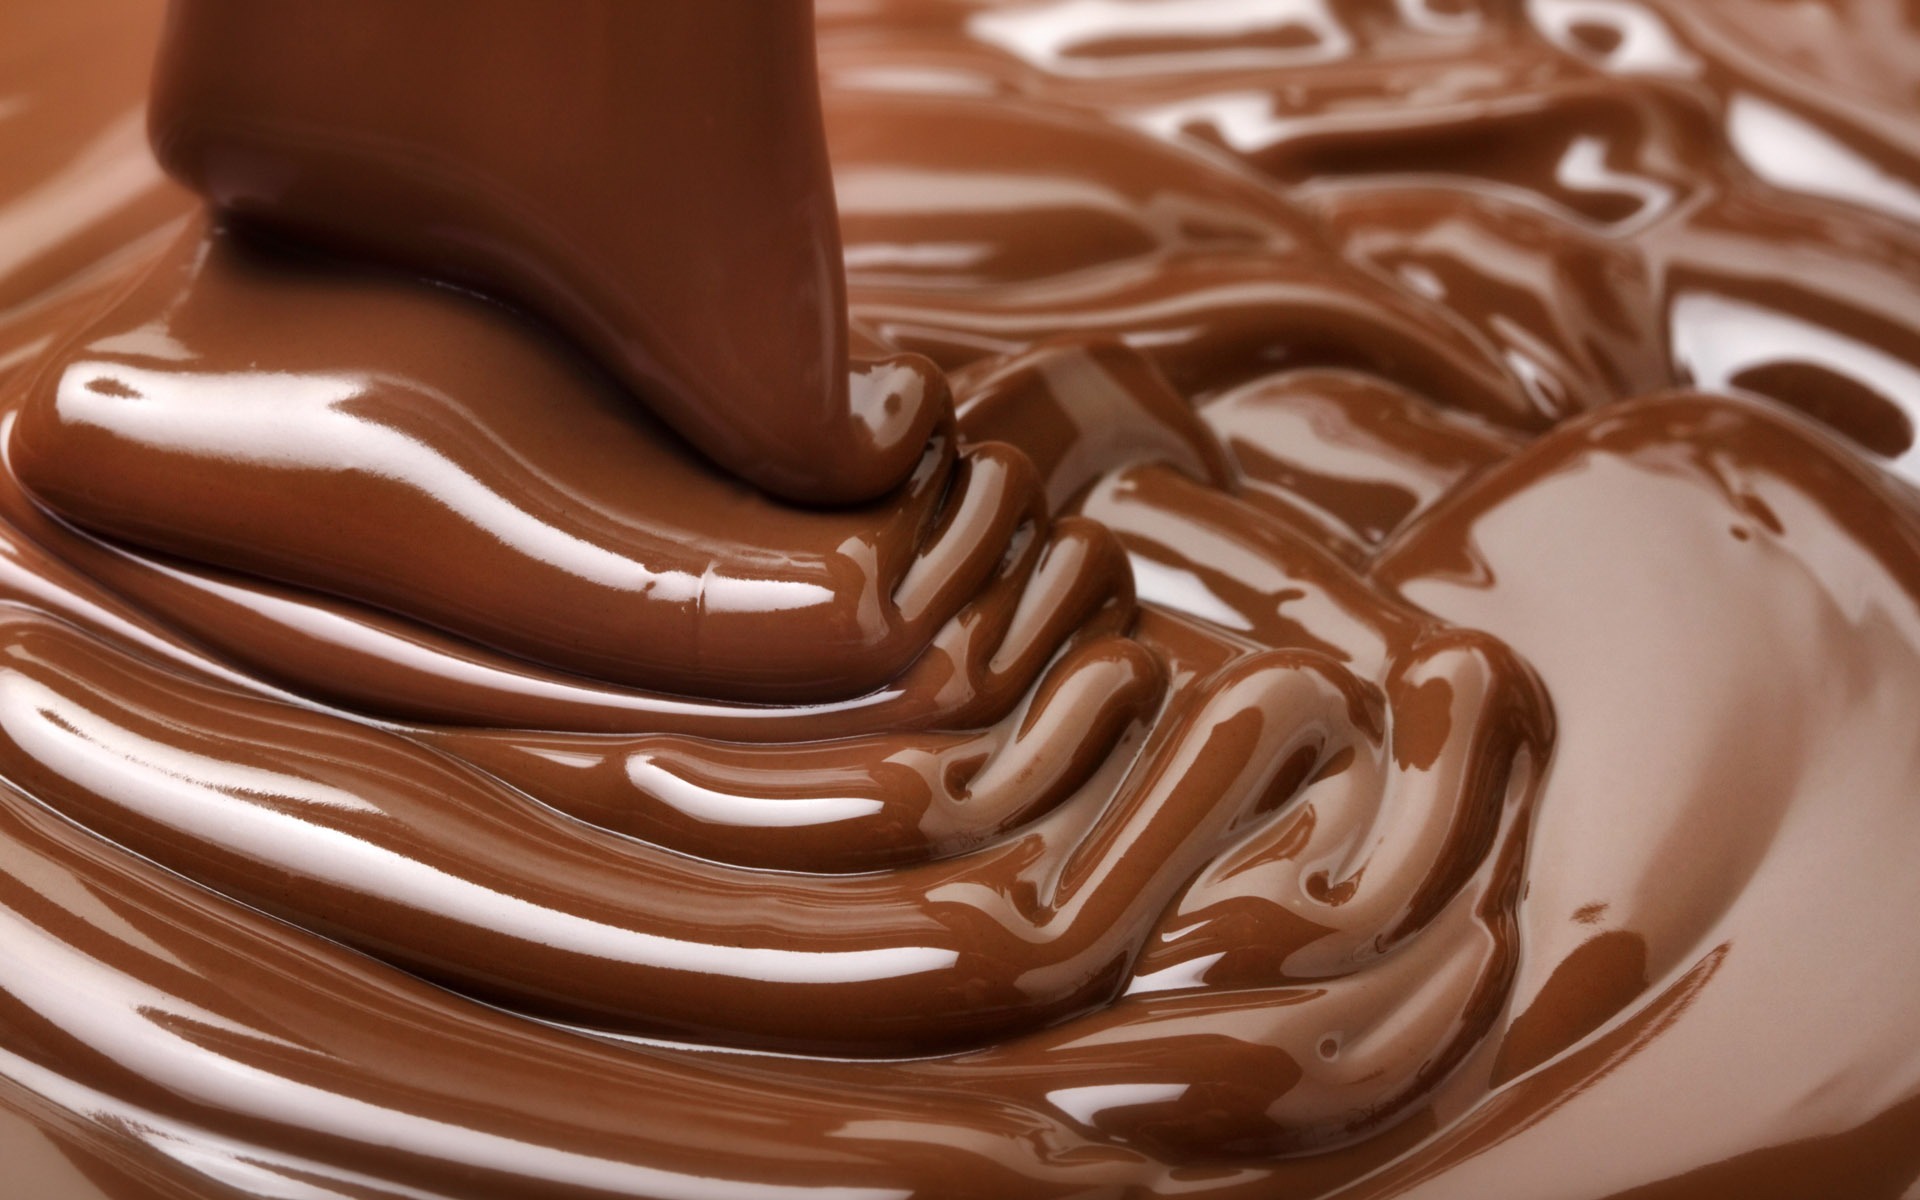 Melted chocolate drizzling over creamy dessert.